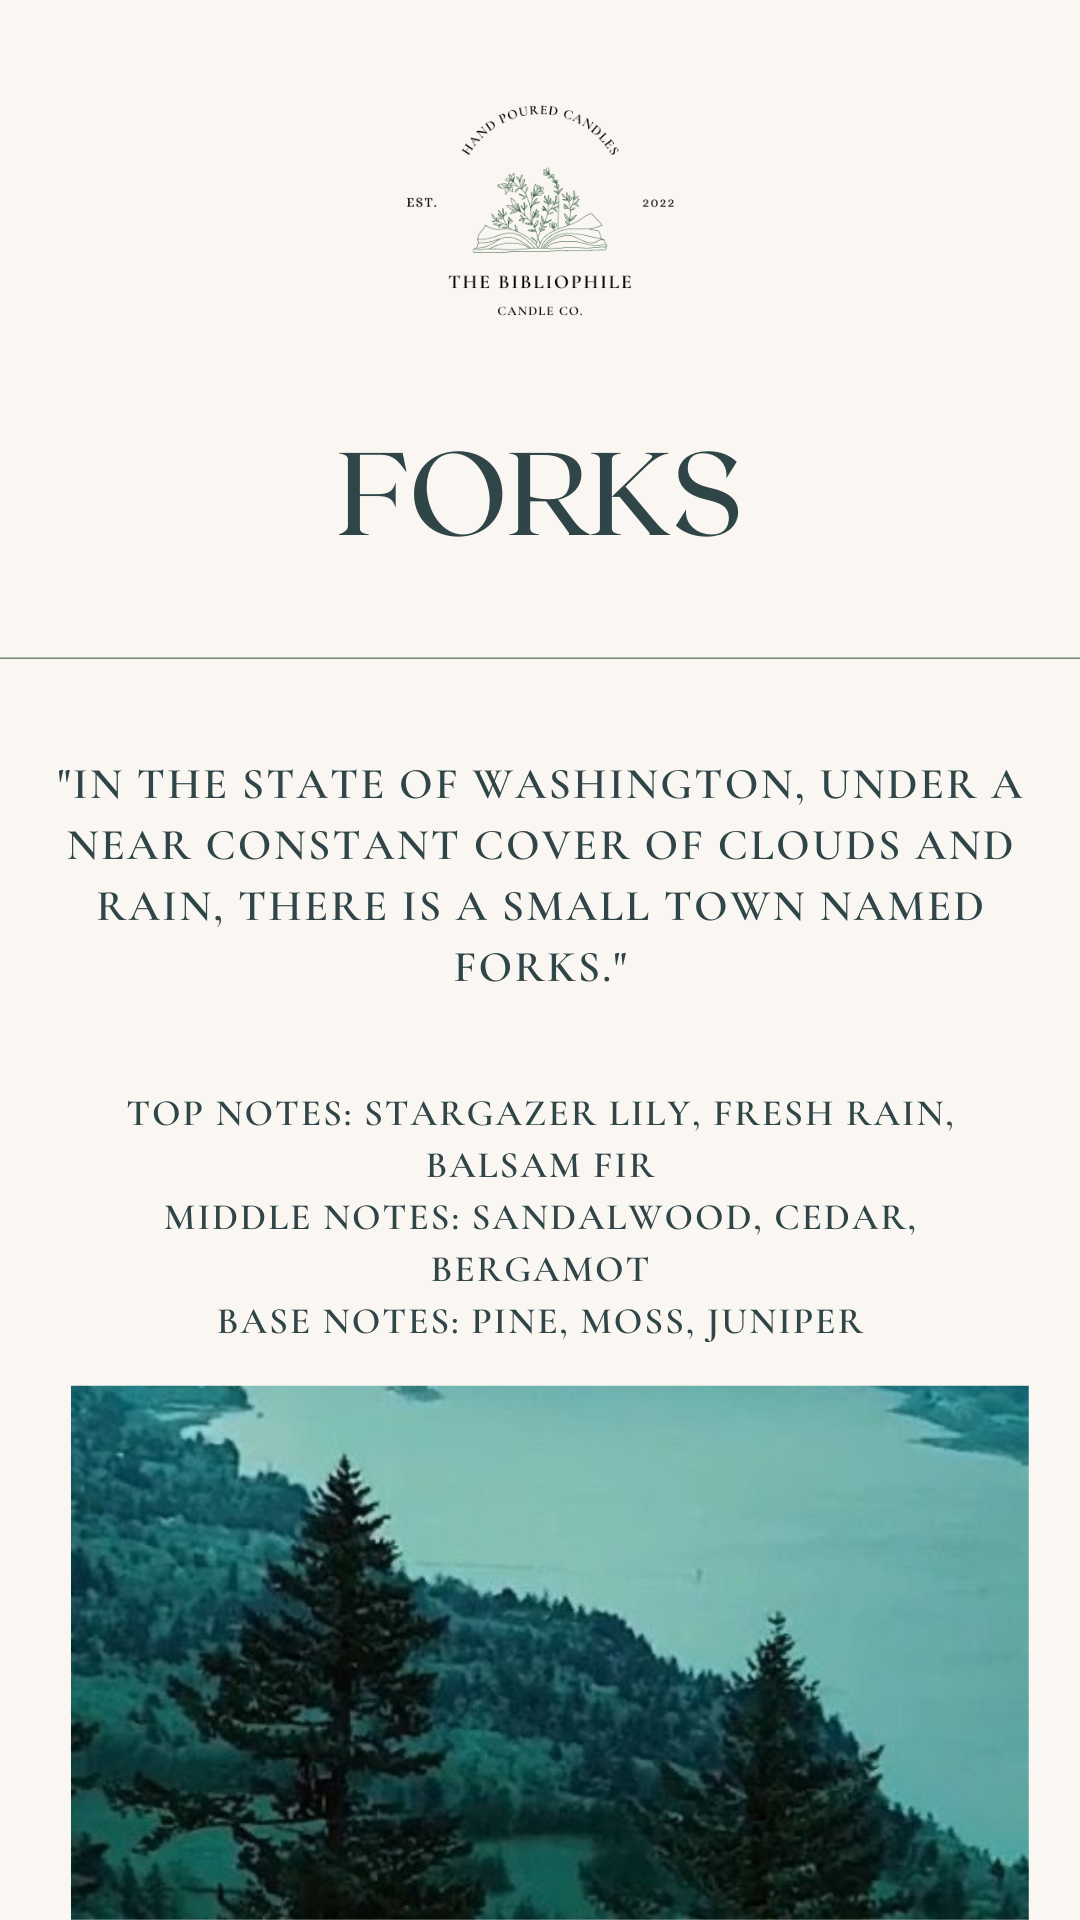 Forks Scented Candle